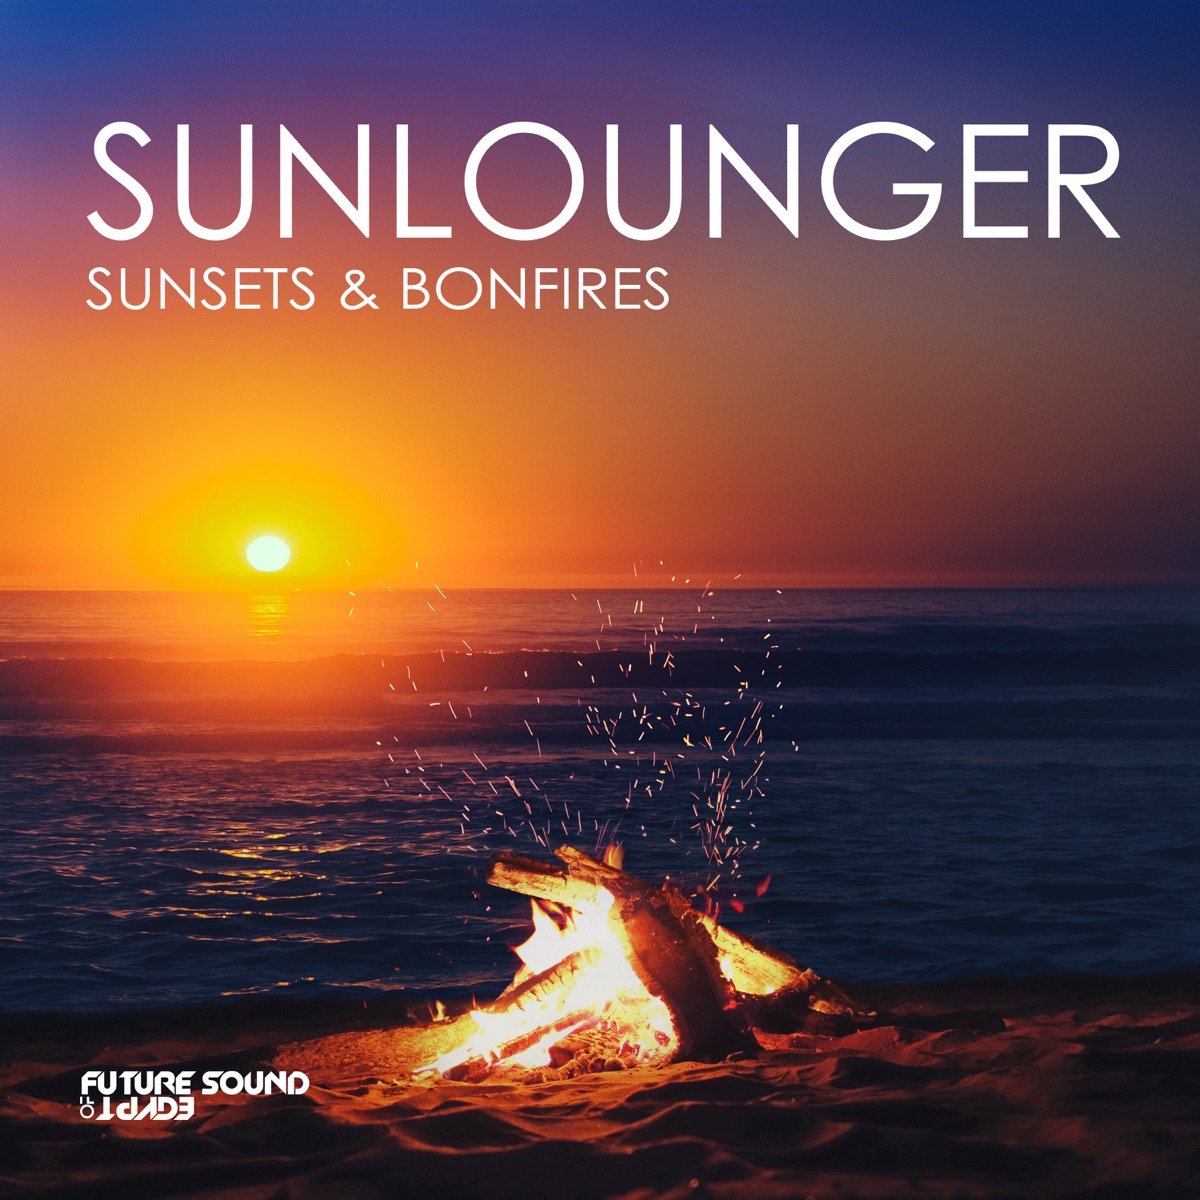 Lost - EP by Sunlounger & Zara on Apple Music